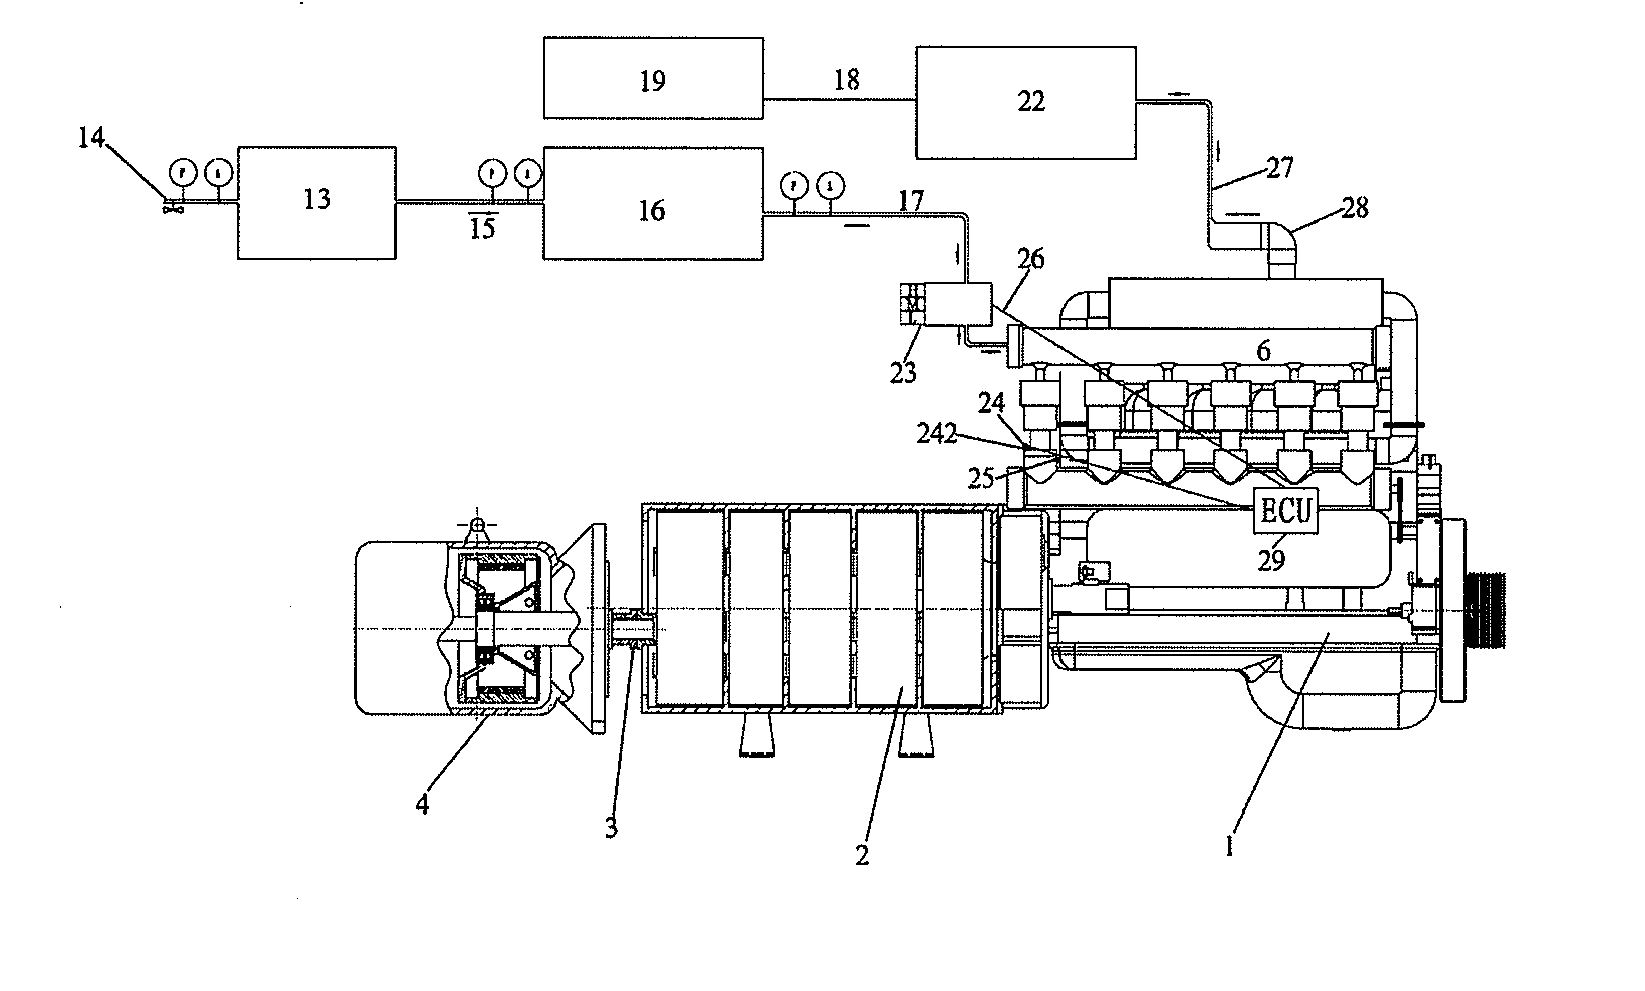 Two-stroke air-powered engine assembly